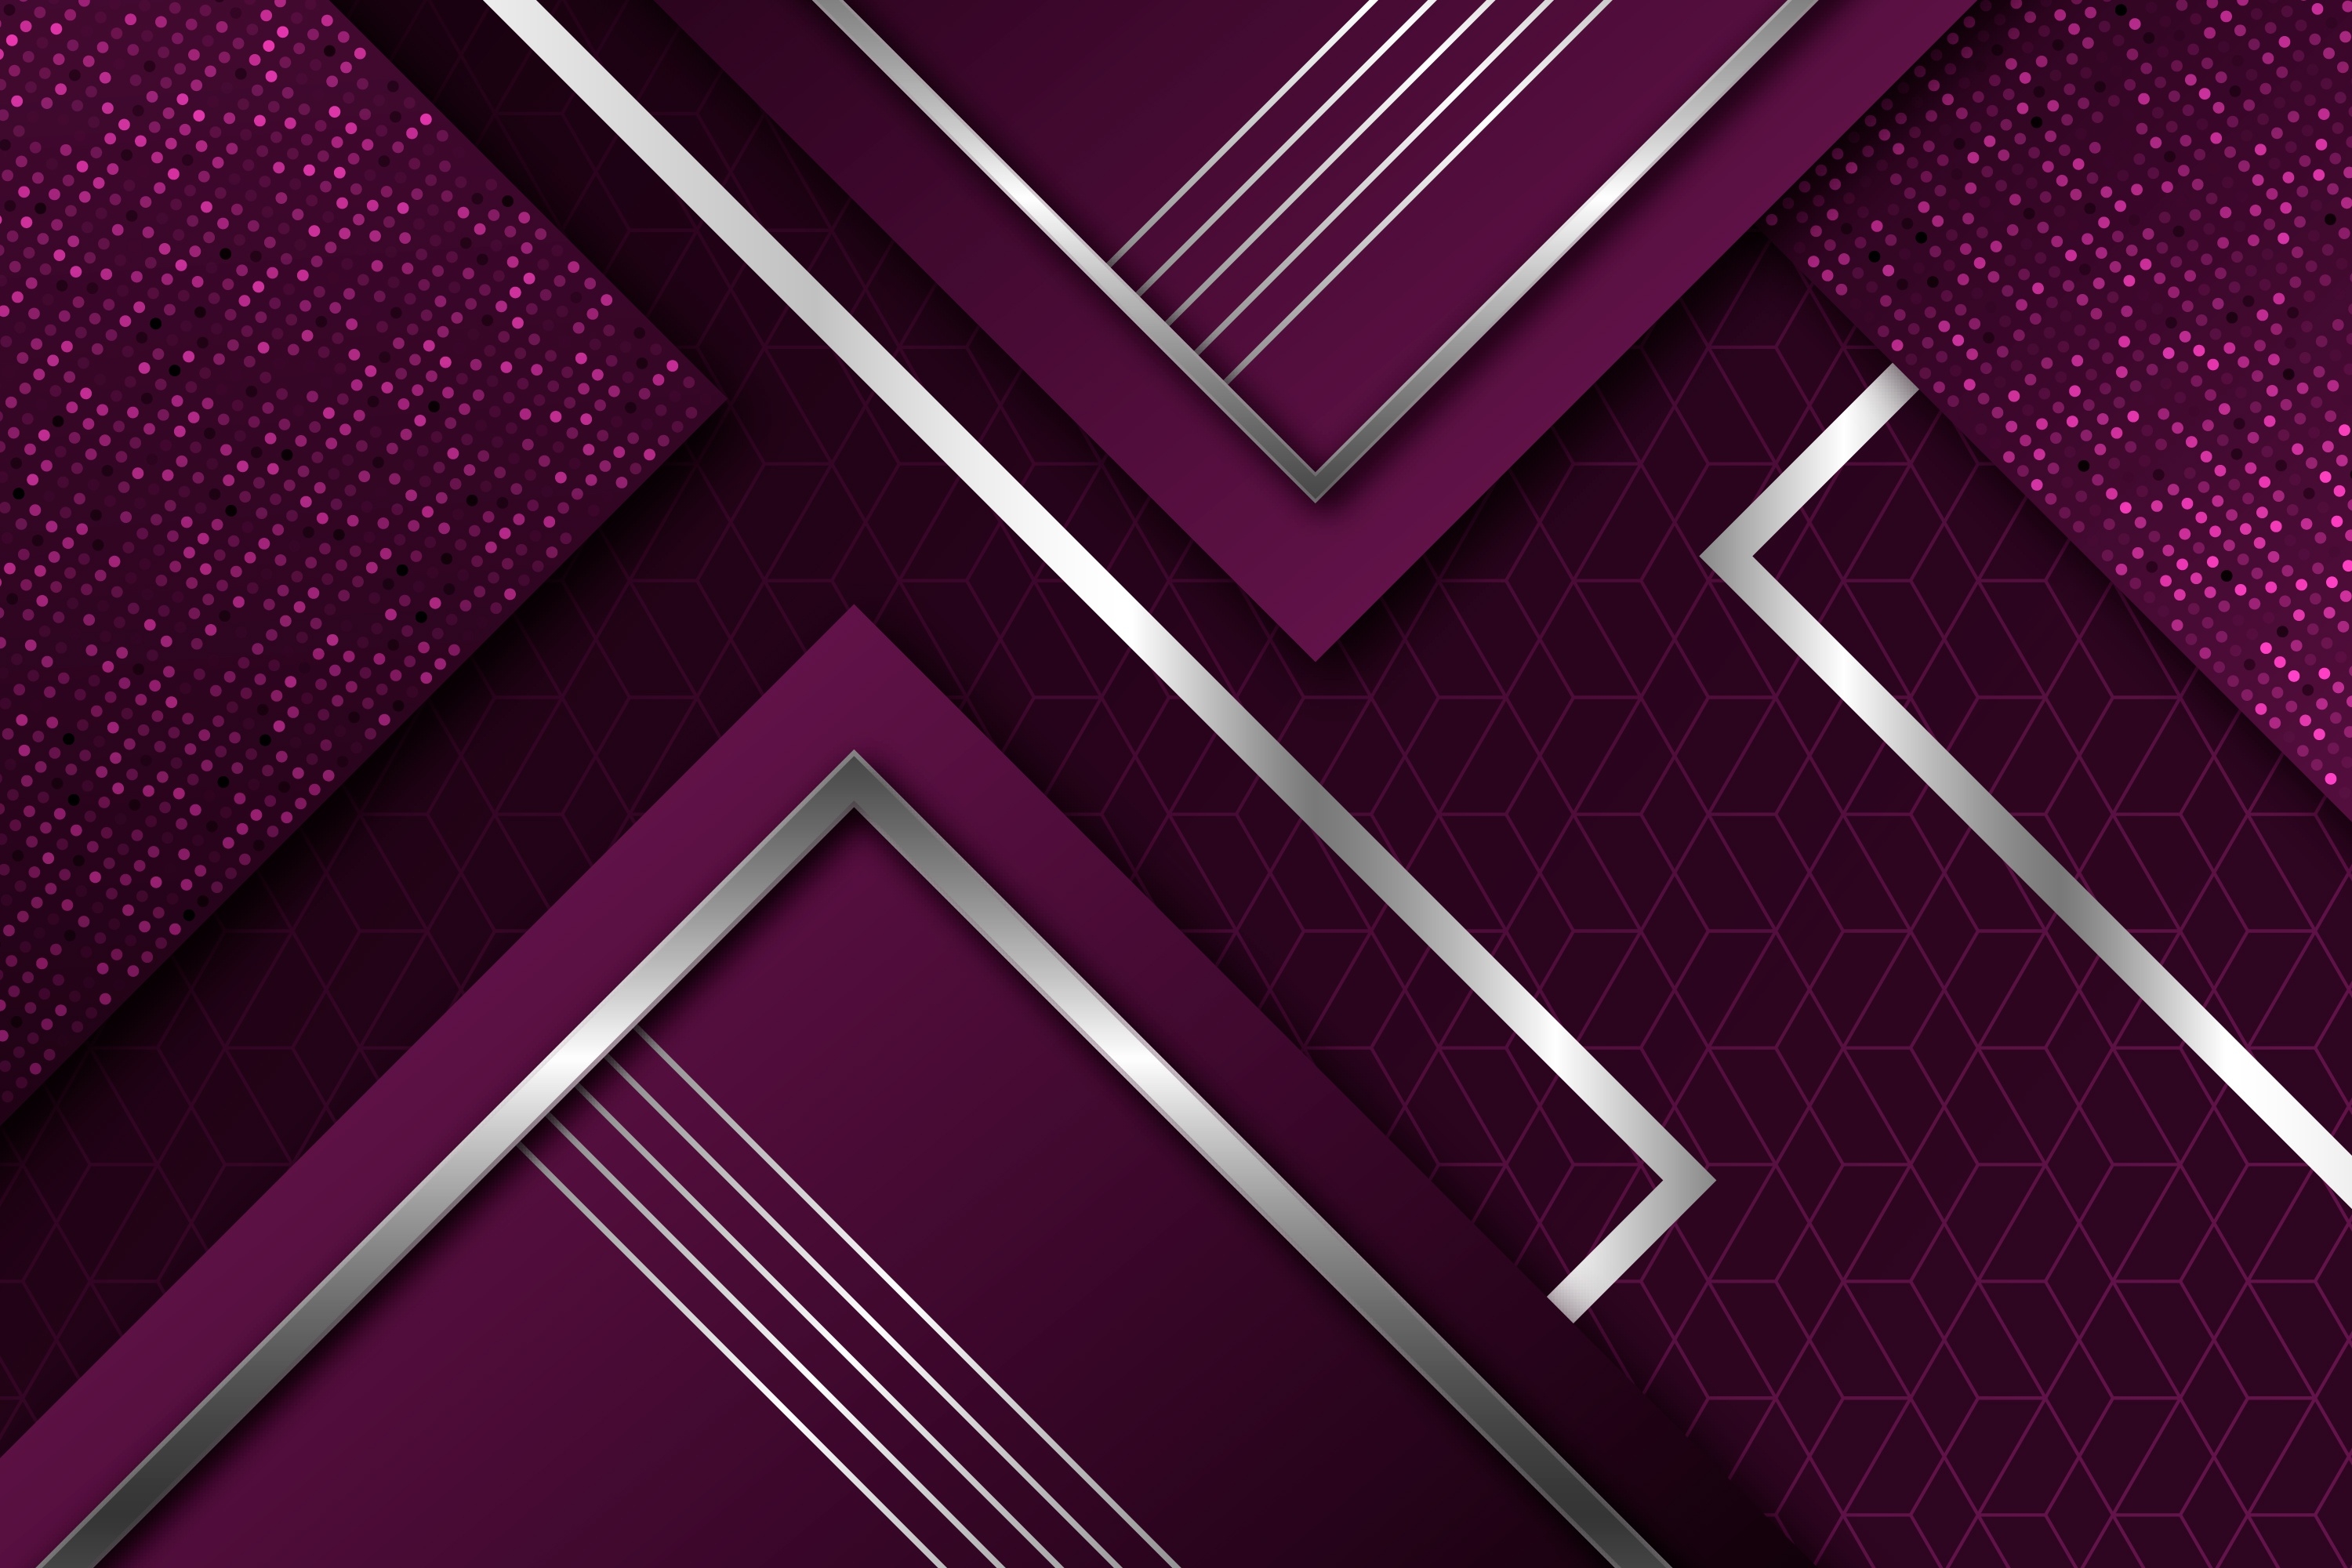 1680x1050 Purple Geometry Art 1680x1050 Resolution Wallpaper Hd Artist 4k Wallpapers Images Photos And Background Wallpapers Den